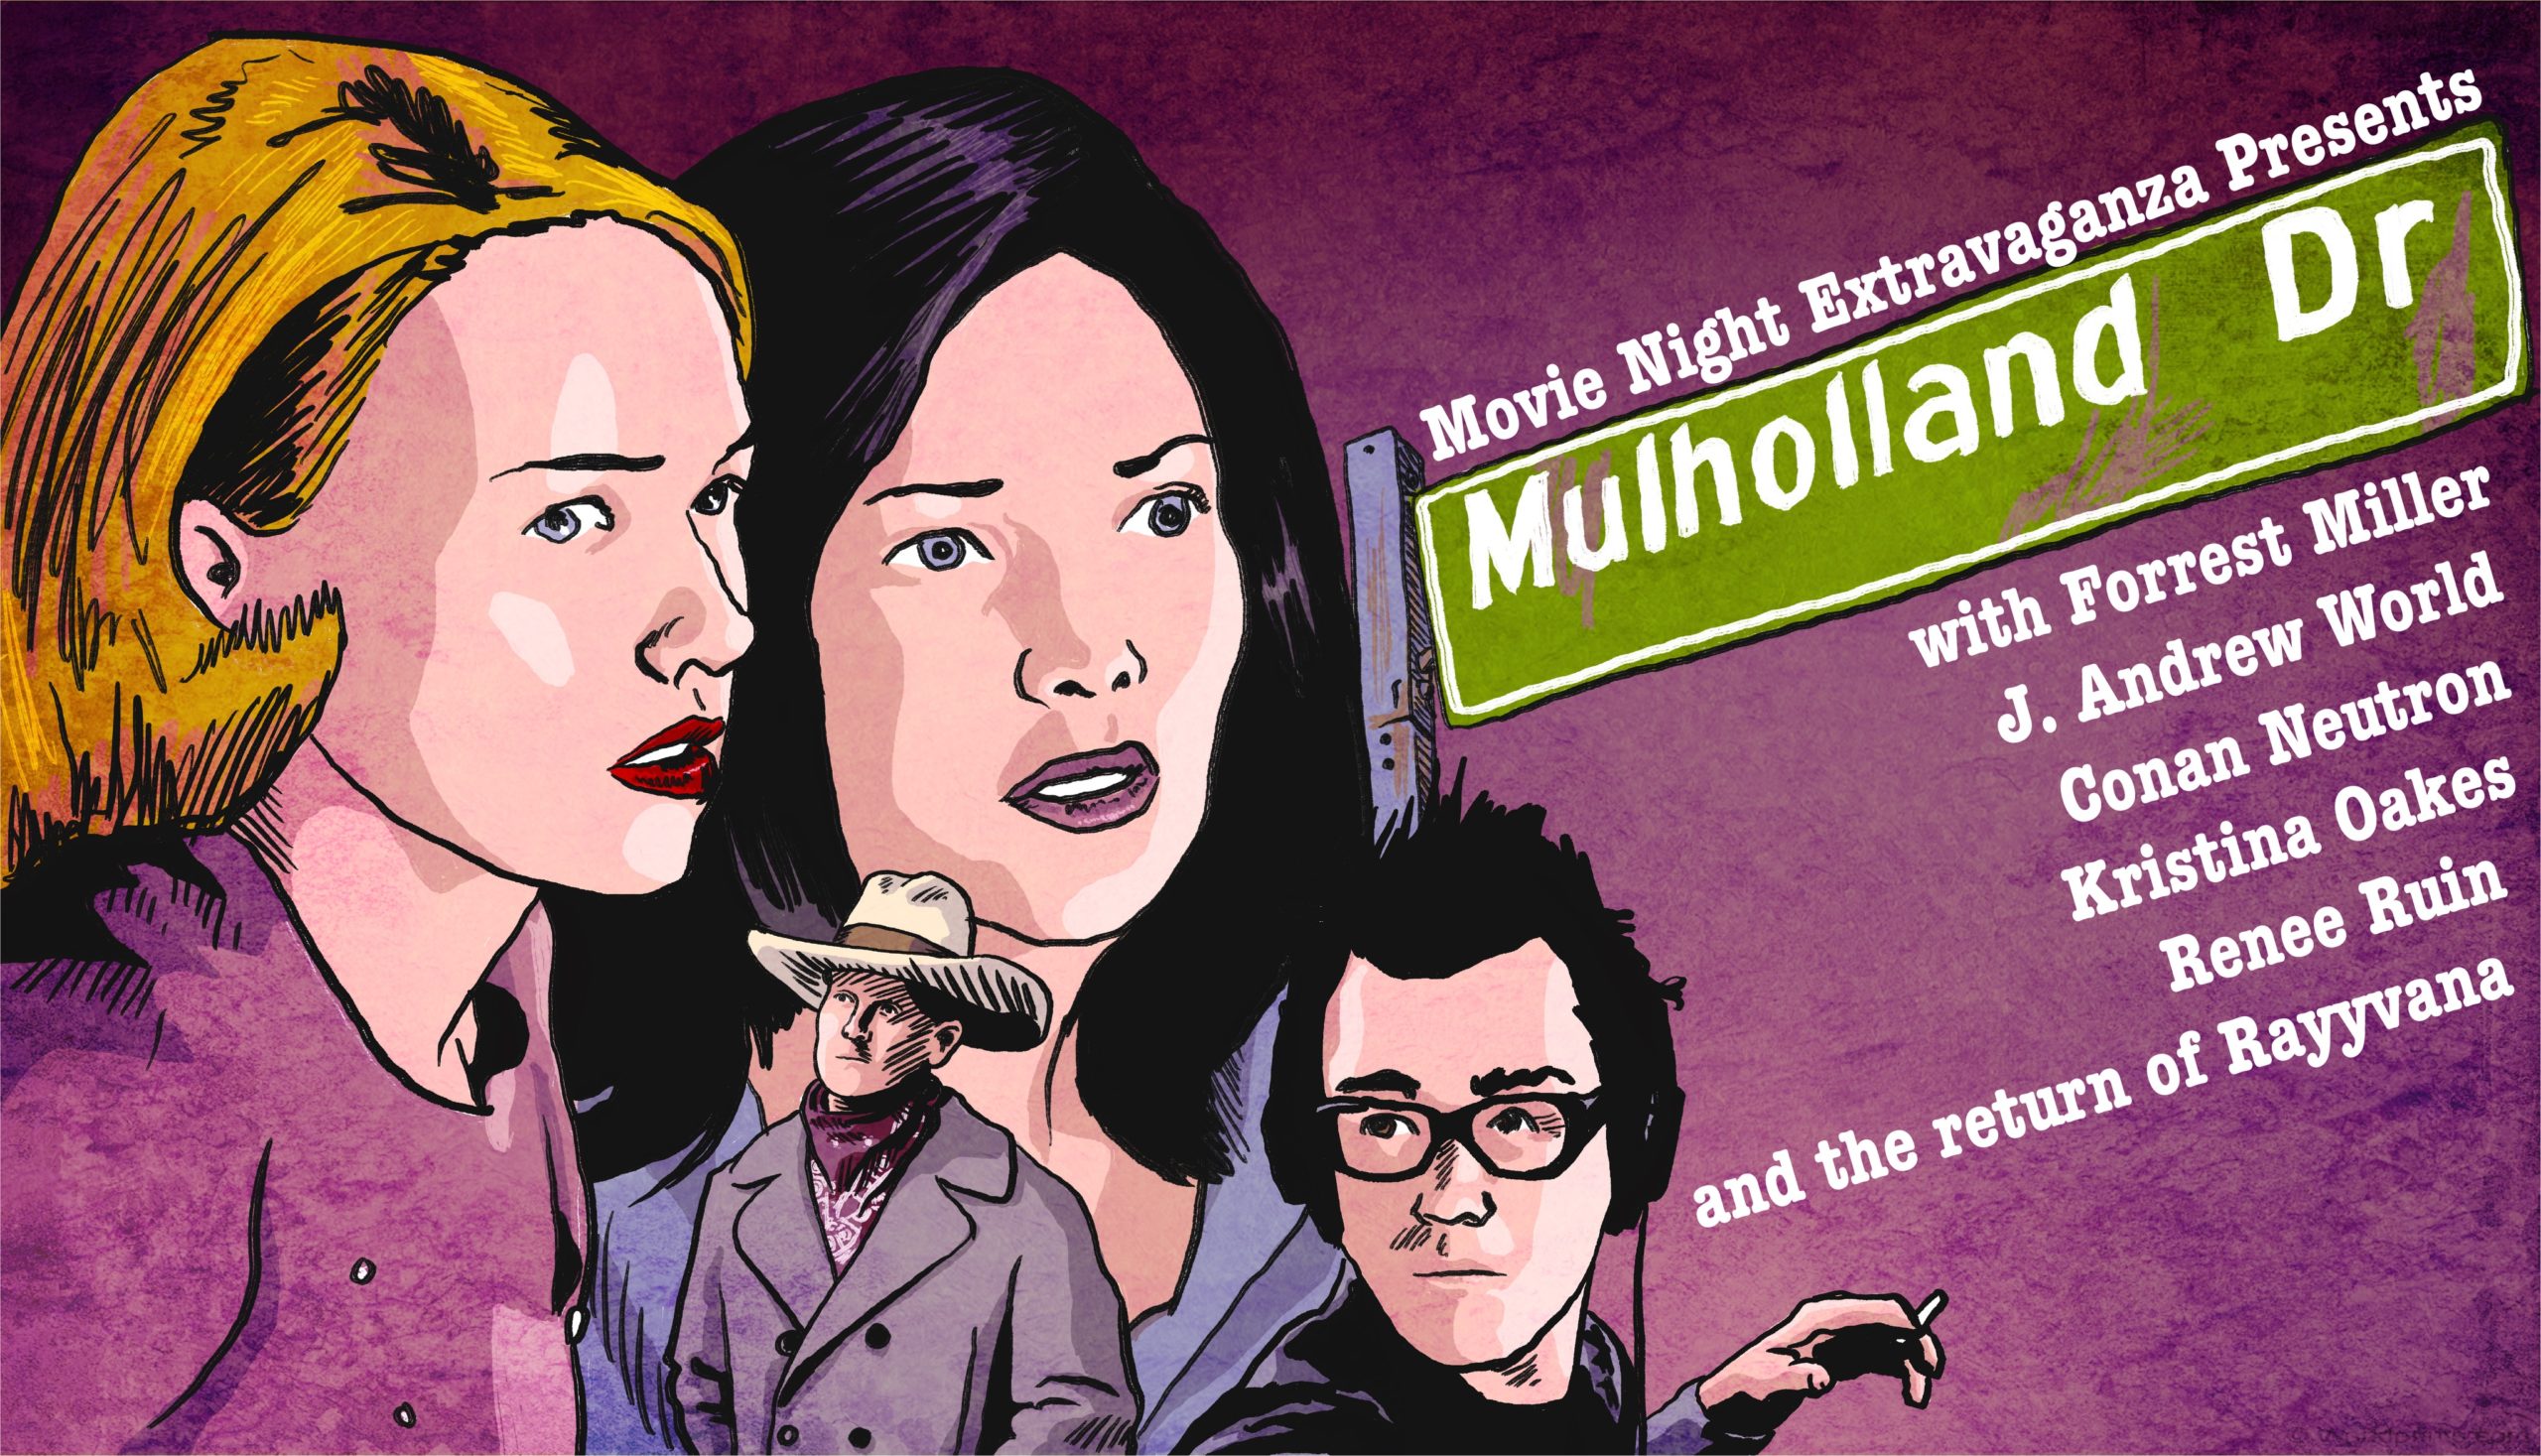 Episode 177: Mulholland Drive with Renee Ruin and Rayyvana